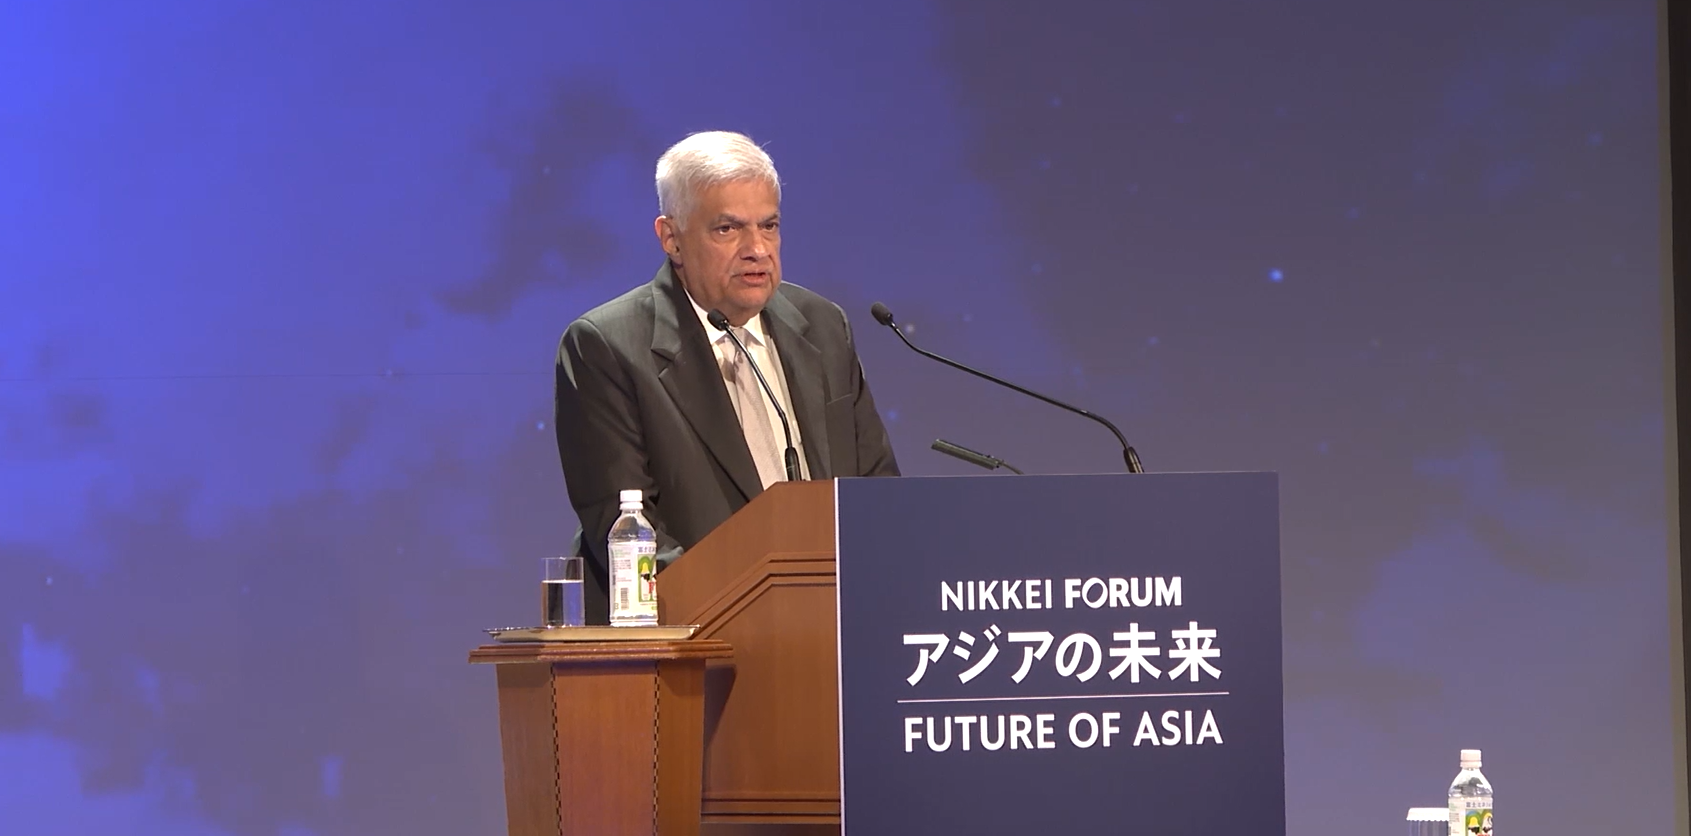 President Ranil Wickremesinghe highlights Asia’s significance at the Nikkei Forum on the Future of Asia in Japan